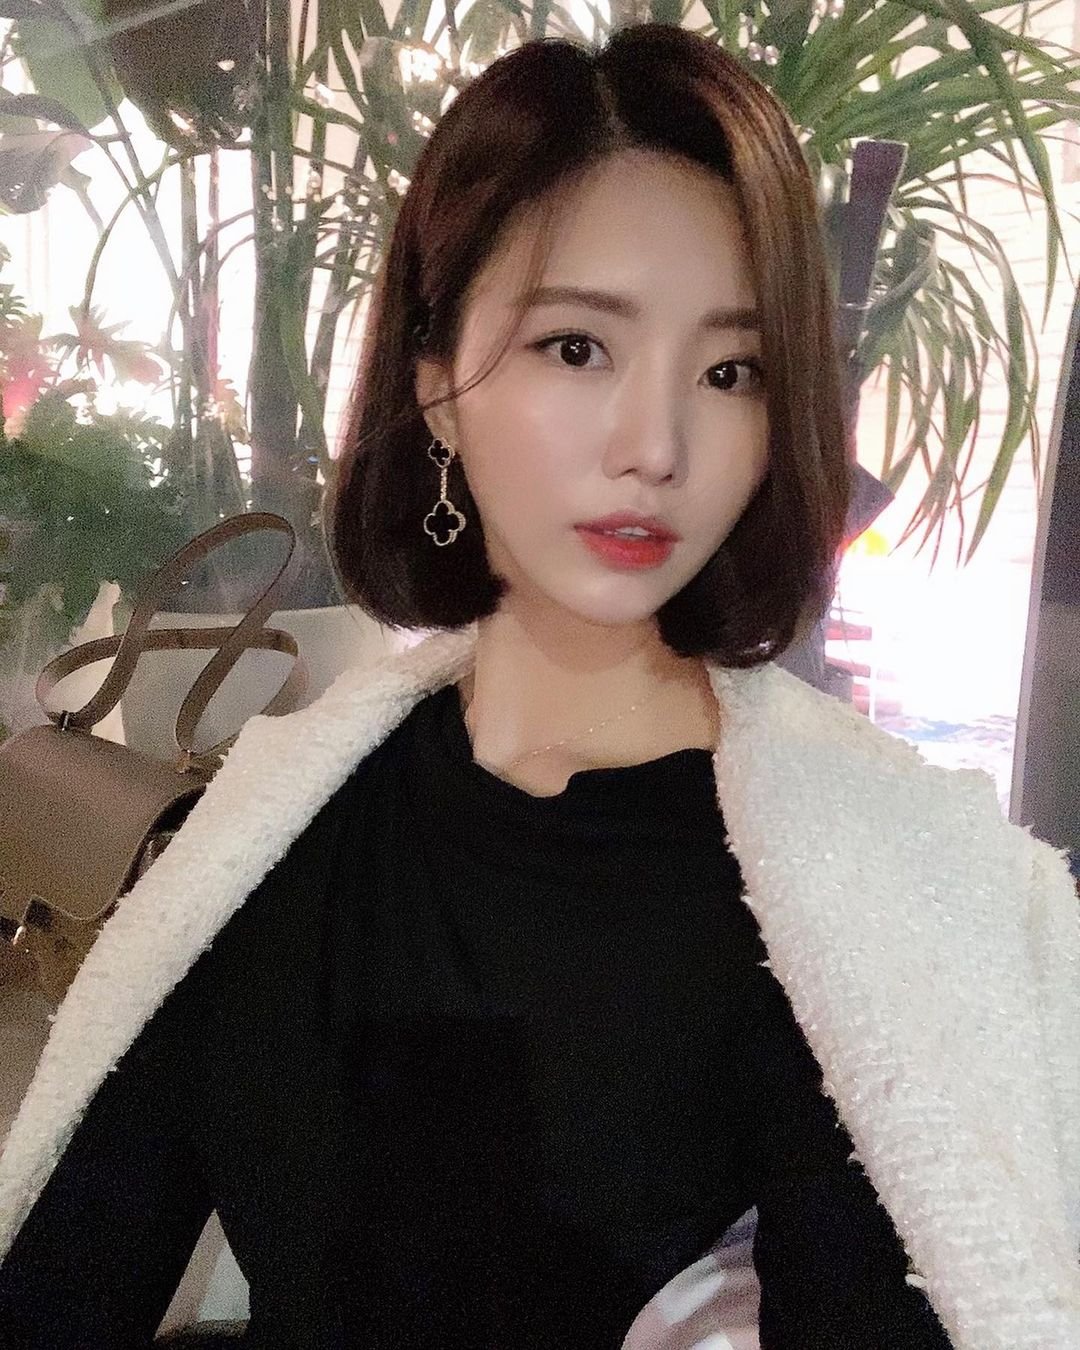 My name is Anna and I am 32 years old. Nice to meet you. I am from Taiwan and now I am in Seoul. I am a fashion designer    https://t.co/R8P0K61slY